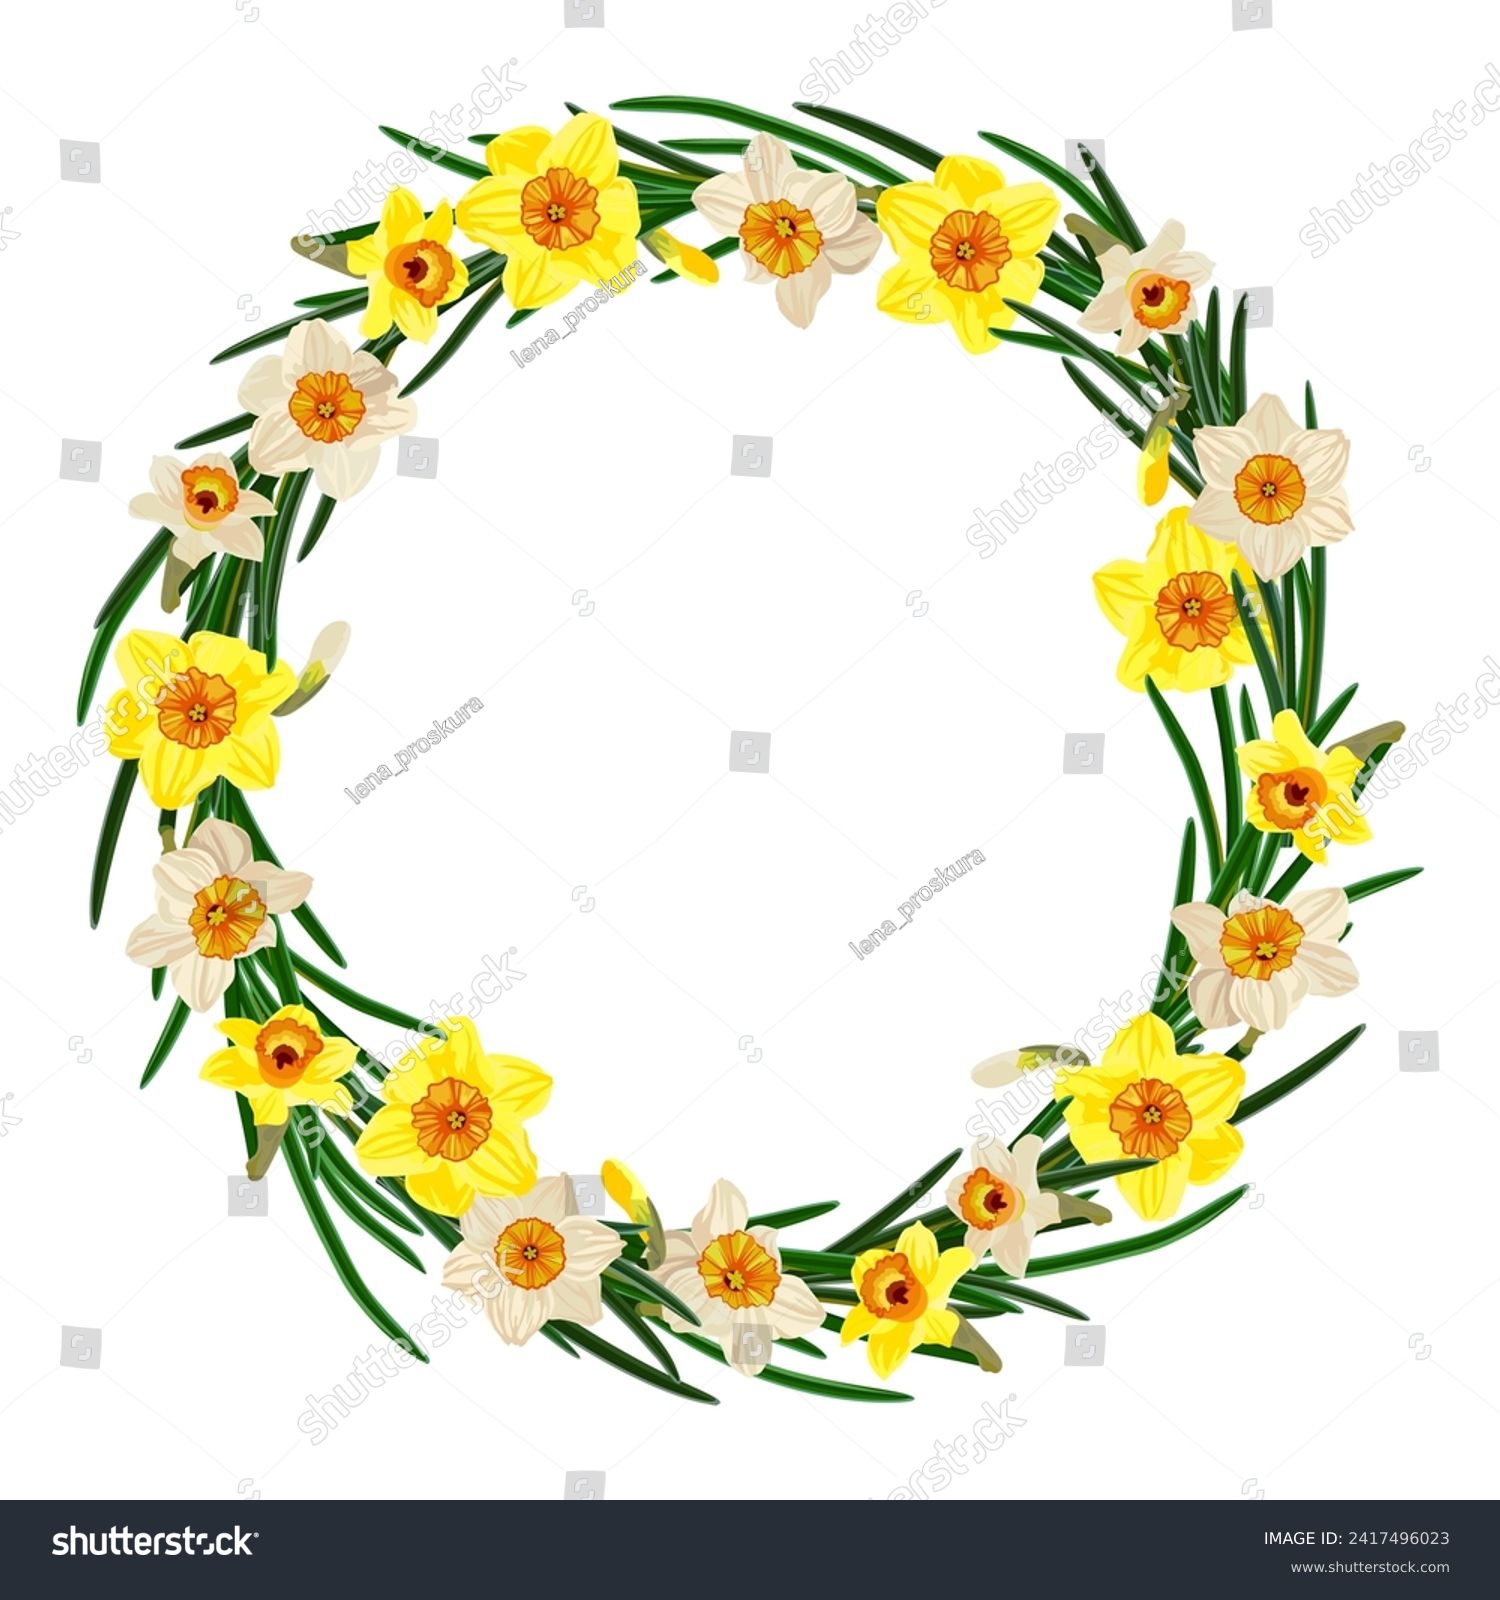 SVG of Empty circular floral wreath of daffodils isolated on white background. svg